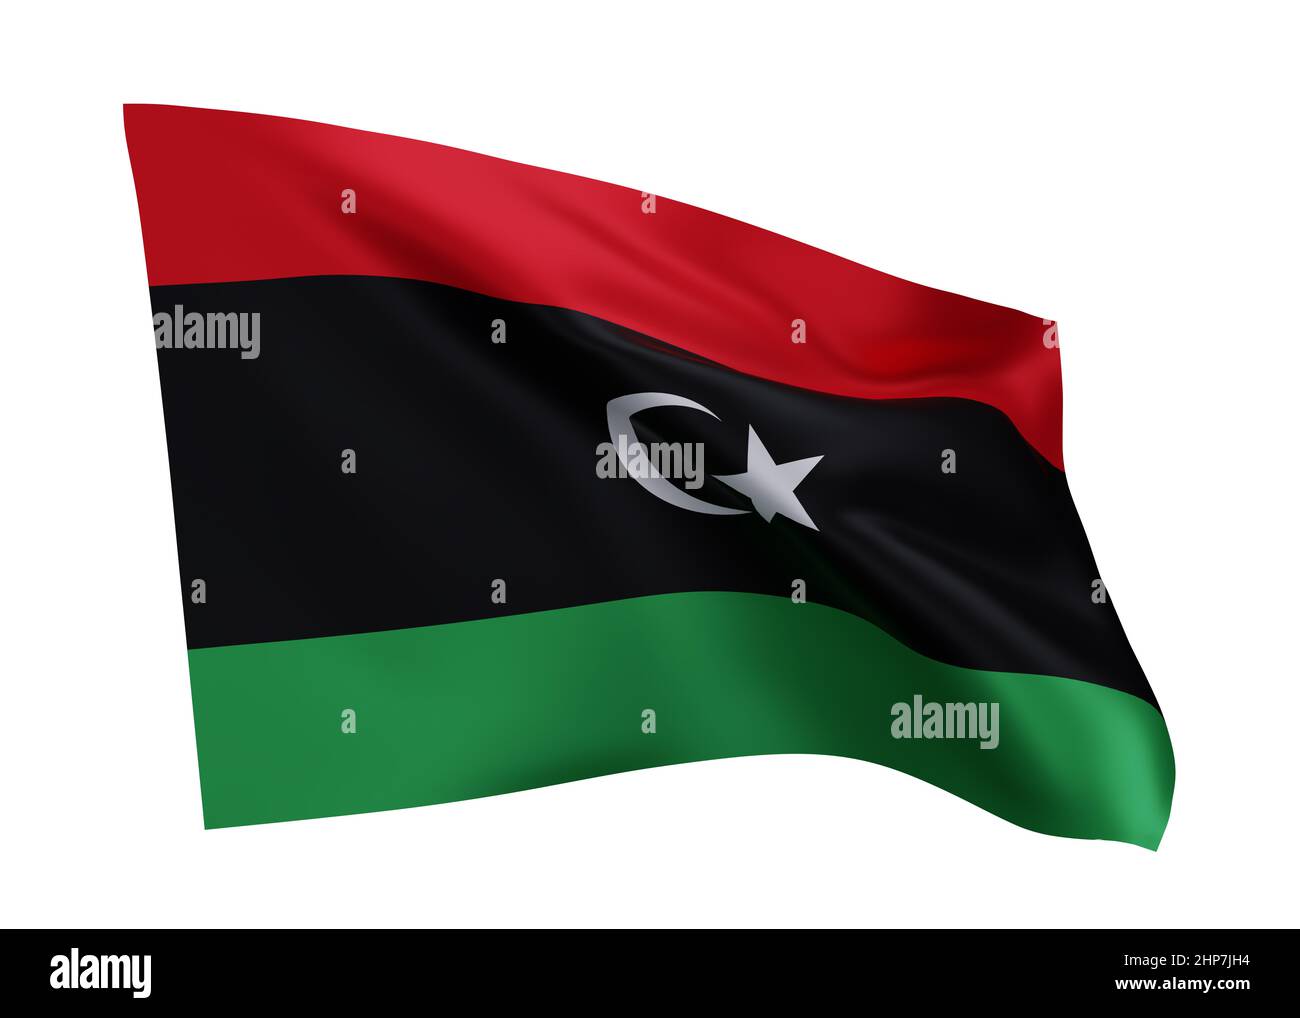 3d illustration flag of Libya. Libyan high resolution flag isolated against white background. 3d rendering Stock Photo